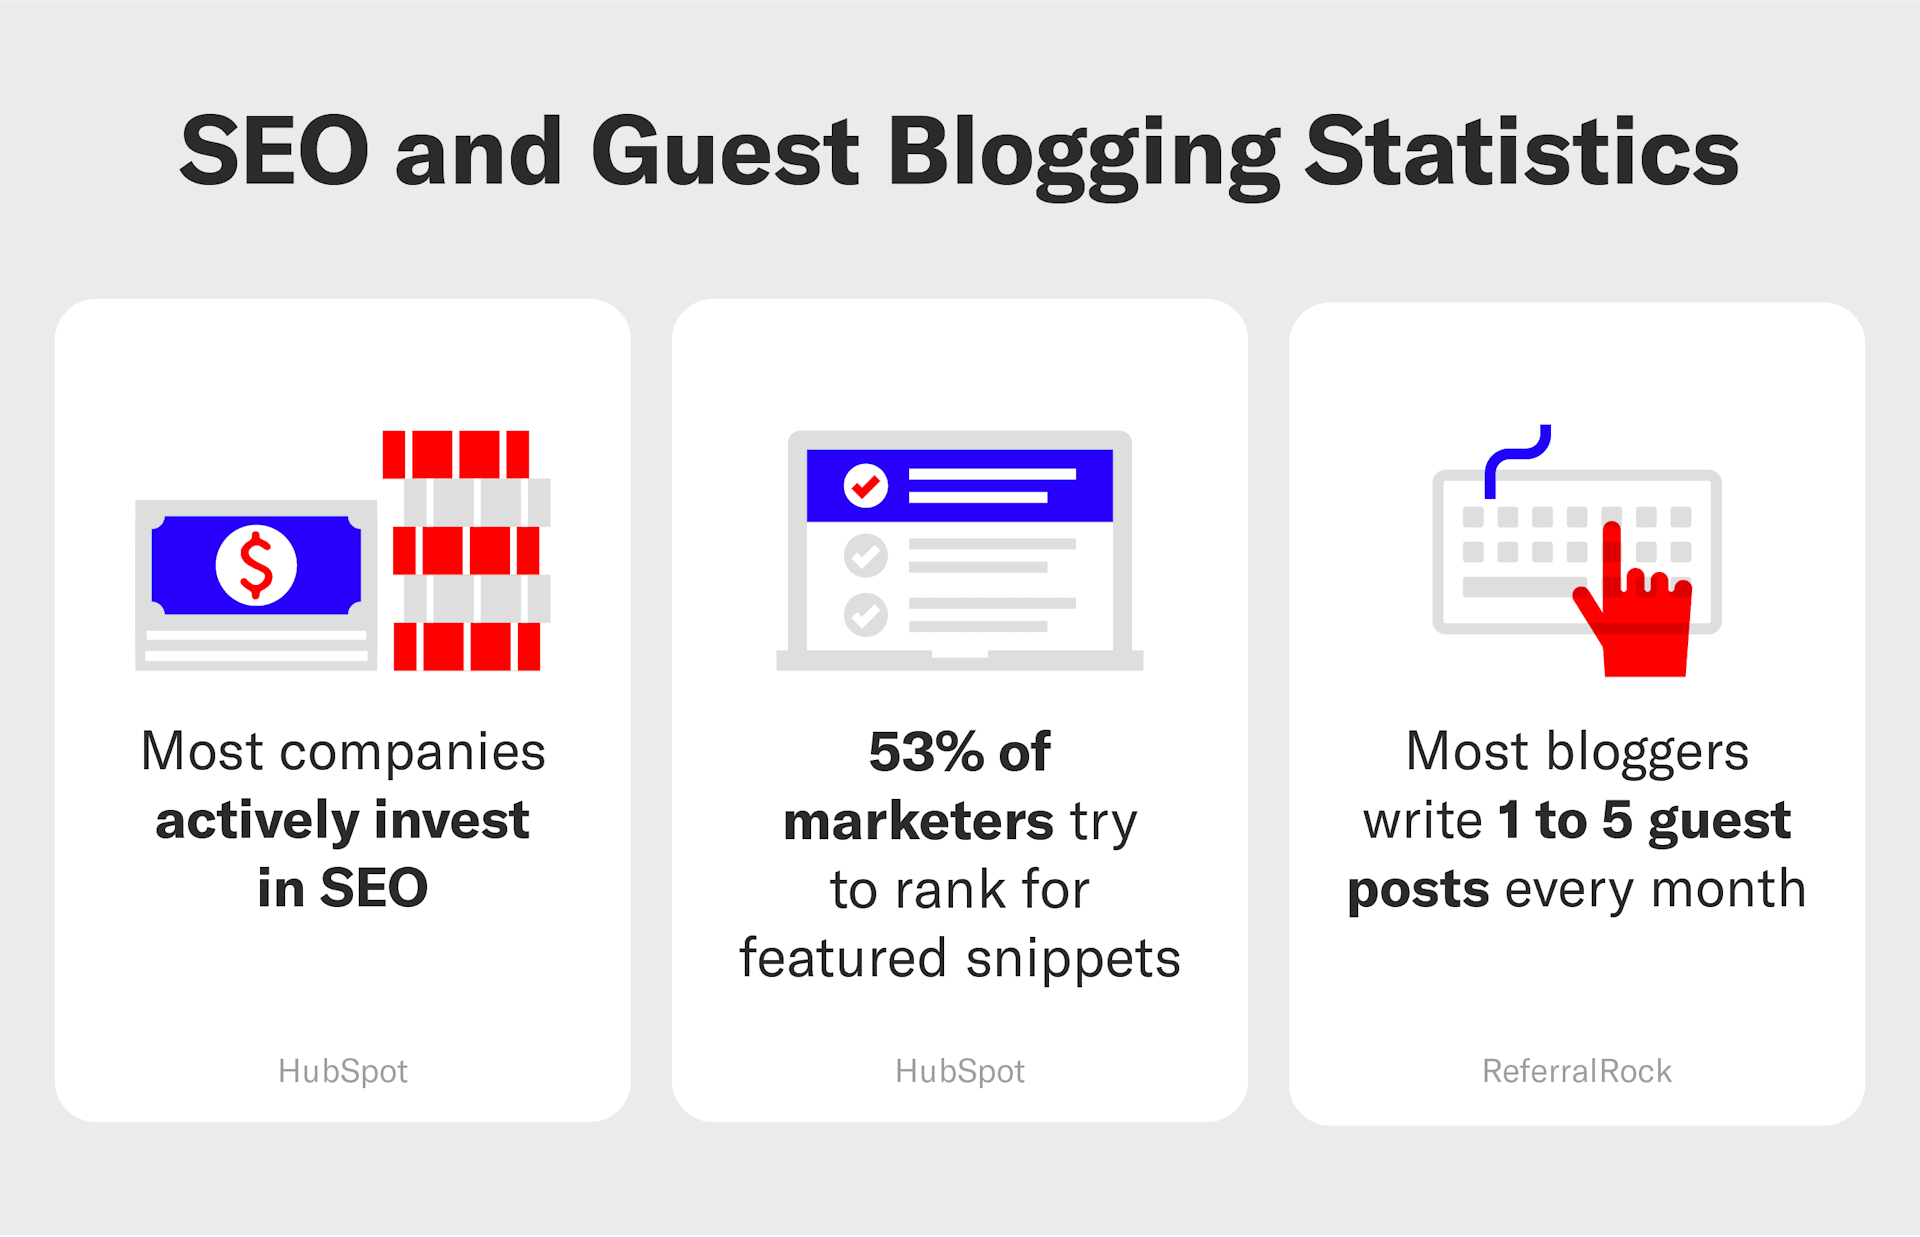 Content marketing is important for off page SEO as well as search engines rely on guest posts as well